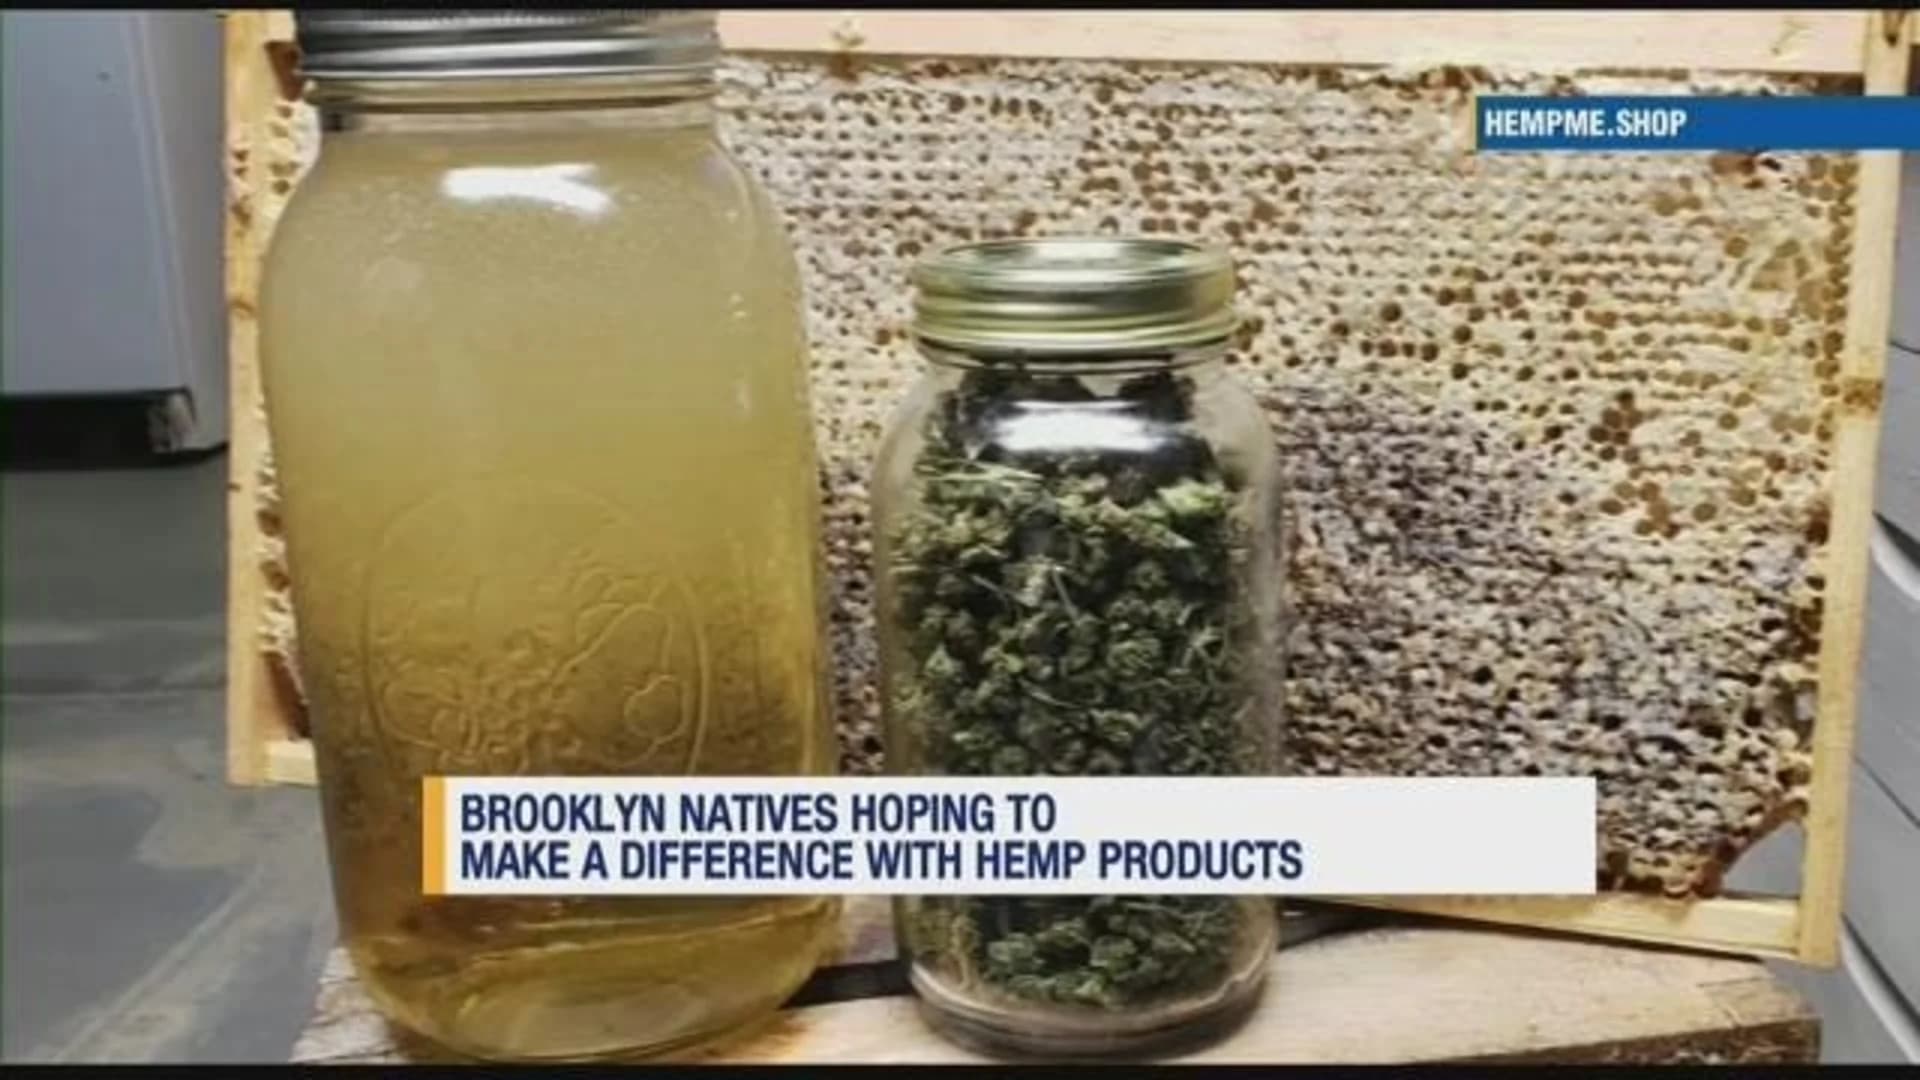 Brooklyn natives sell CBD bee products, hope to make a difference